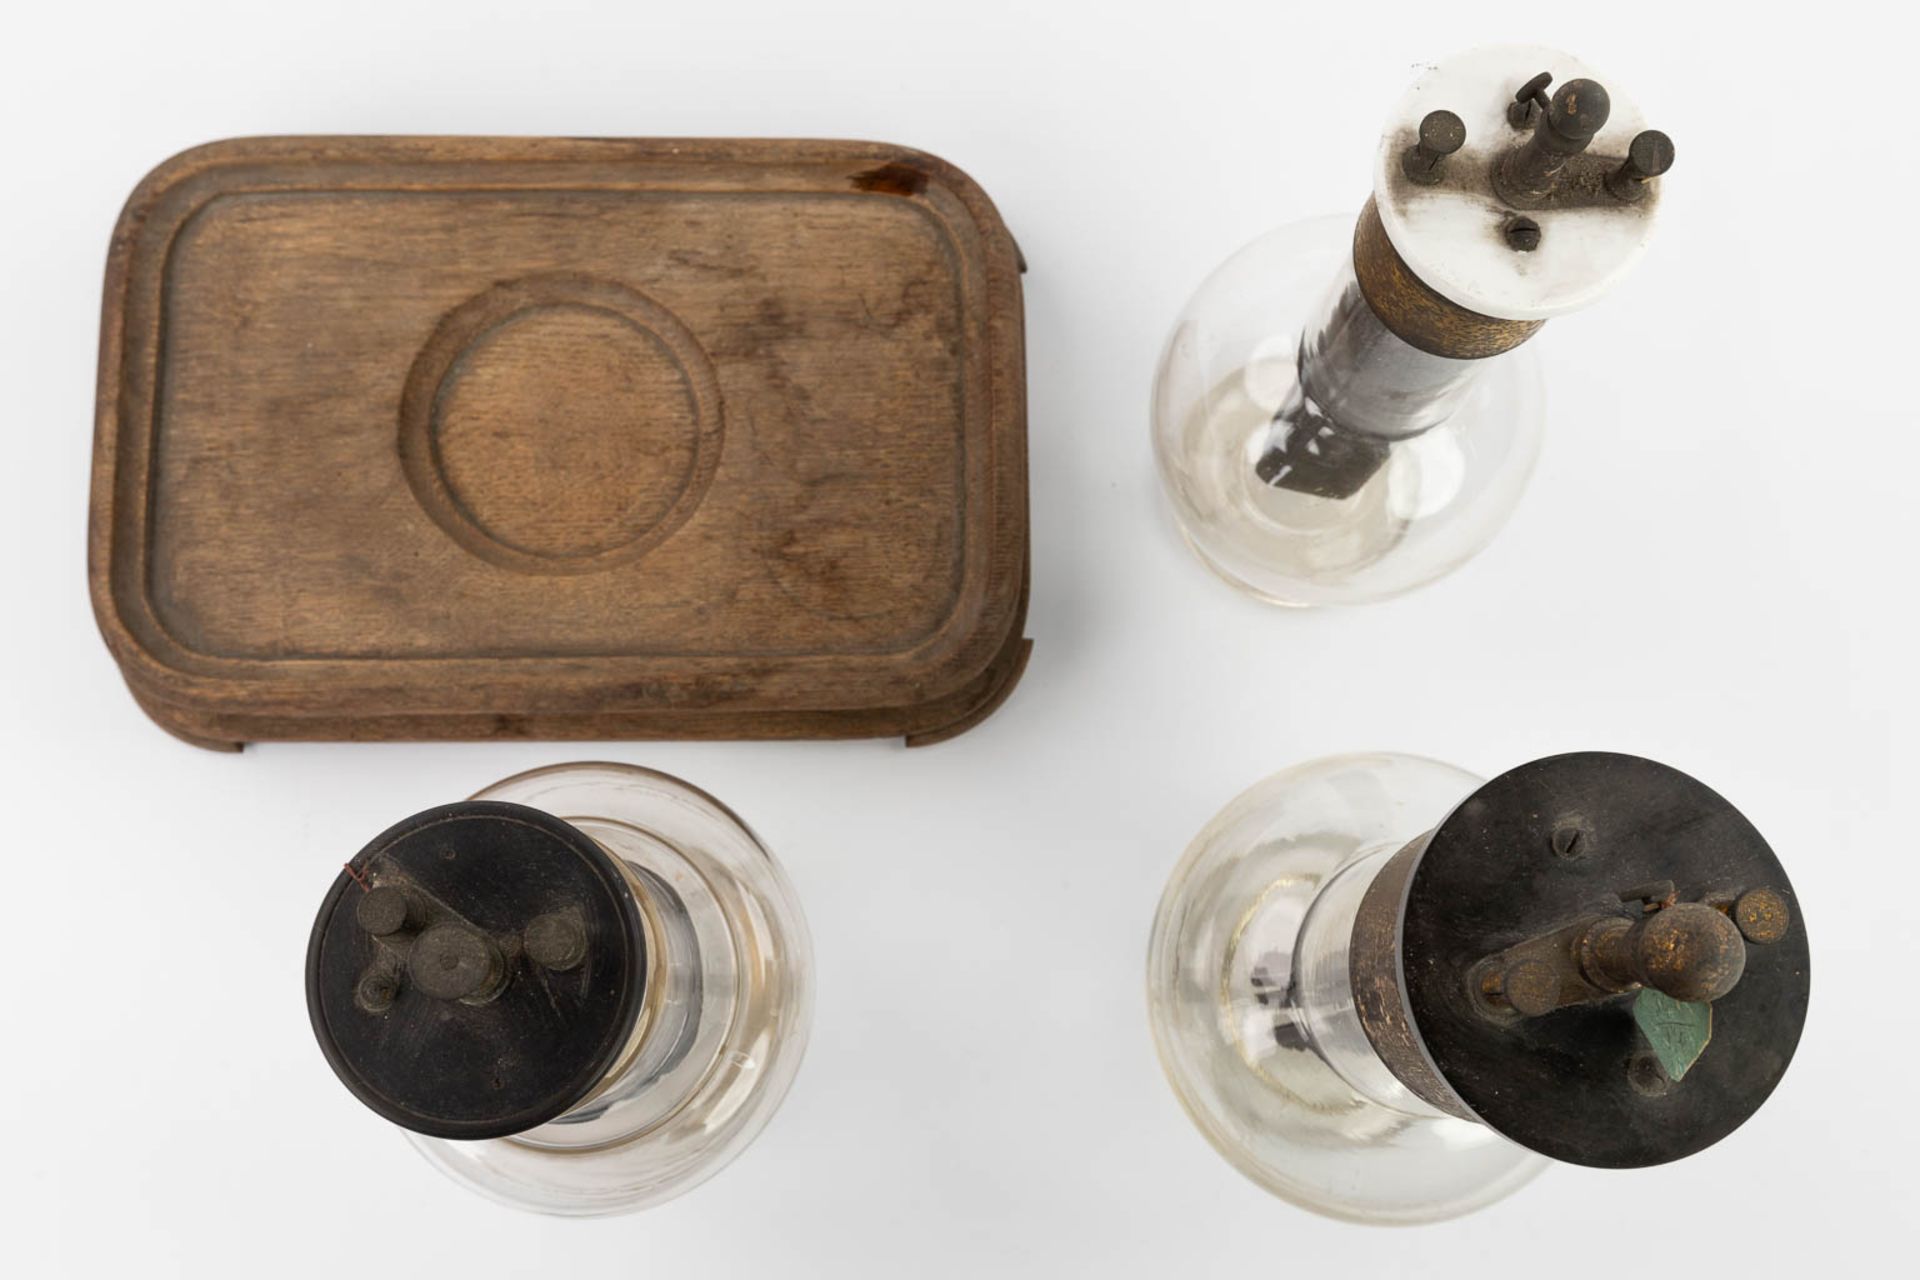 A collection of 3 'Grenet Cell' batteries made of glass. (H:30 x D:14 cm) - Image 9 of 14